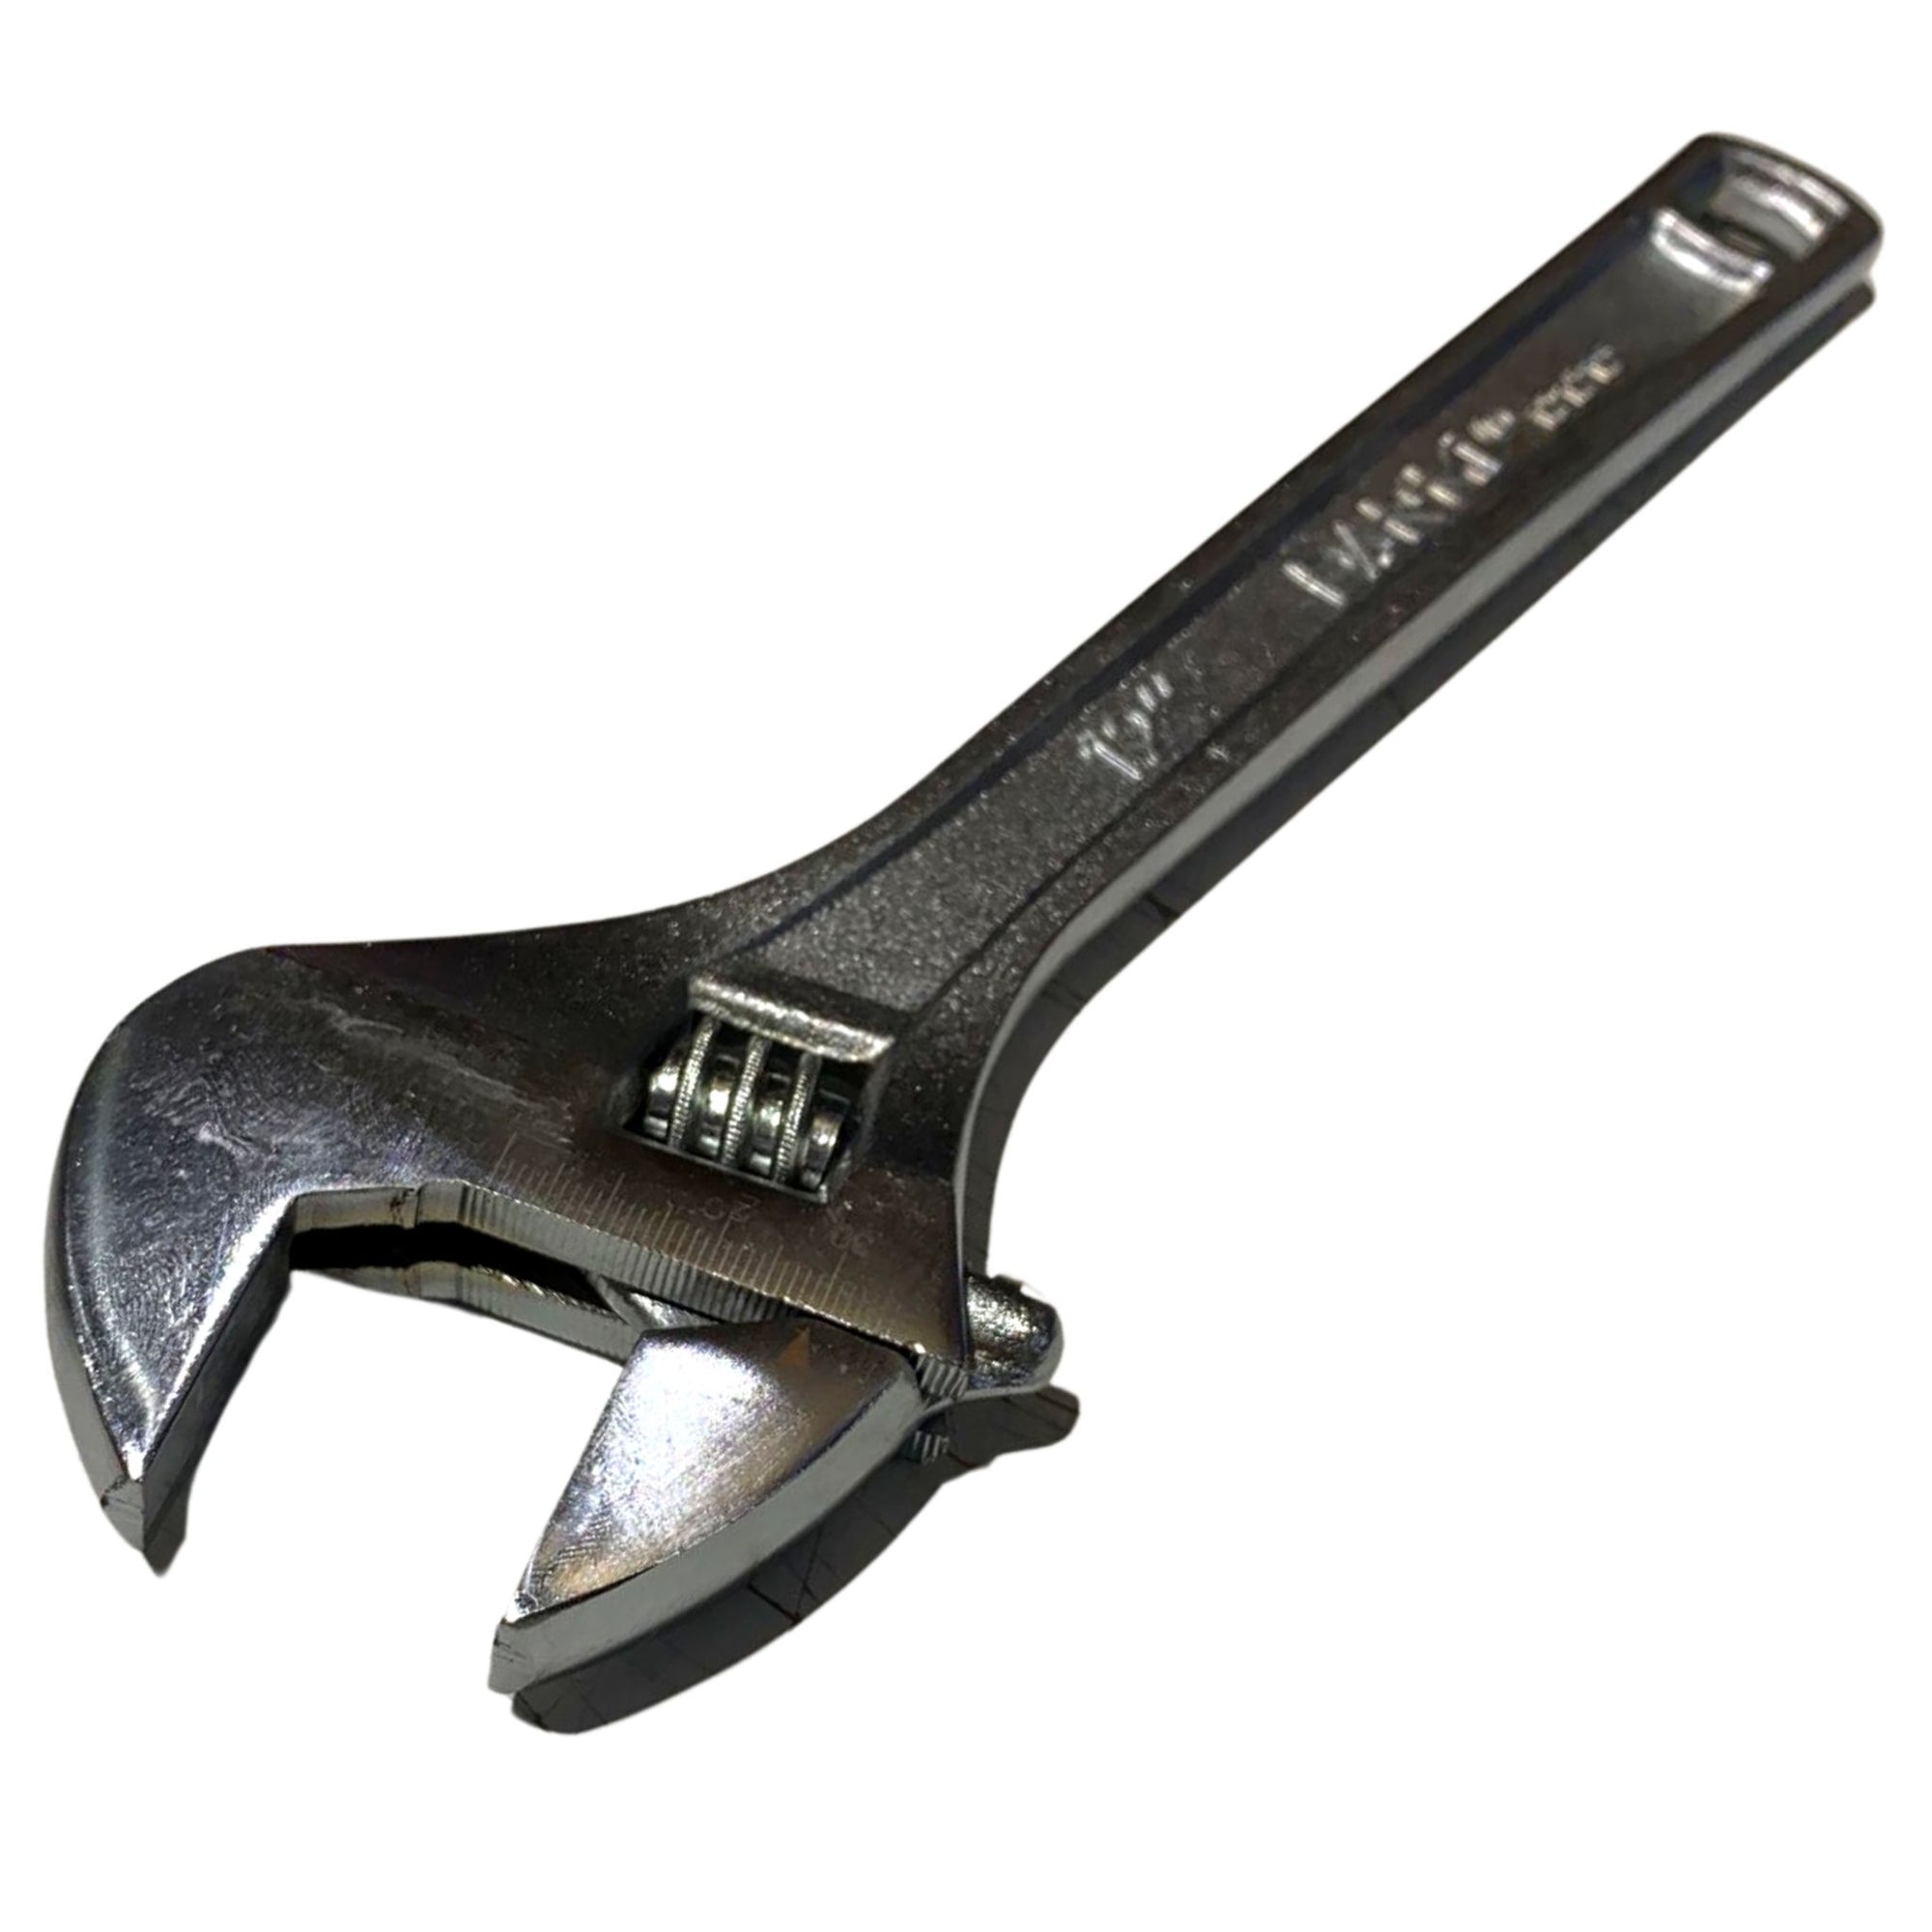 12" Adjustable Wrench - South East Clearance Centre